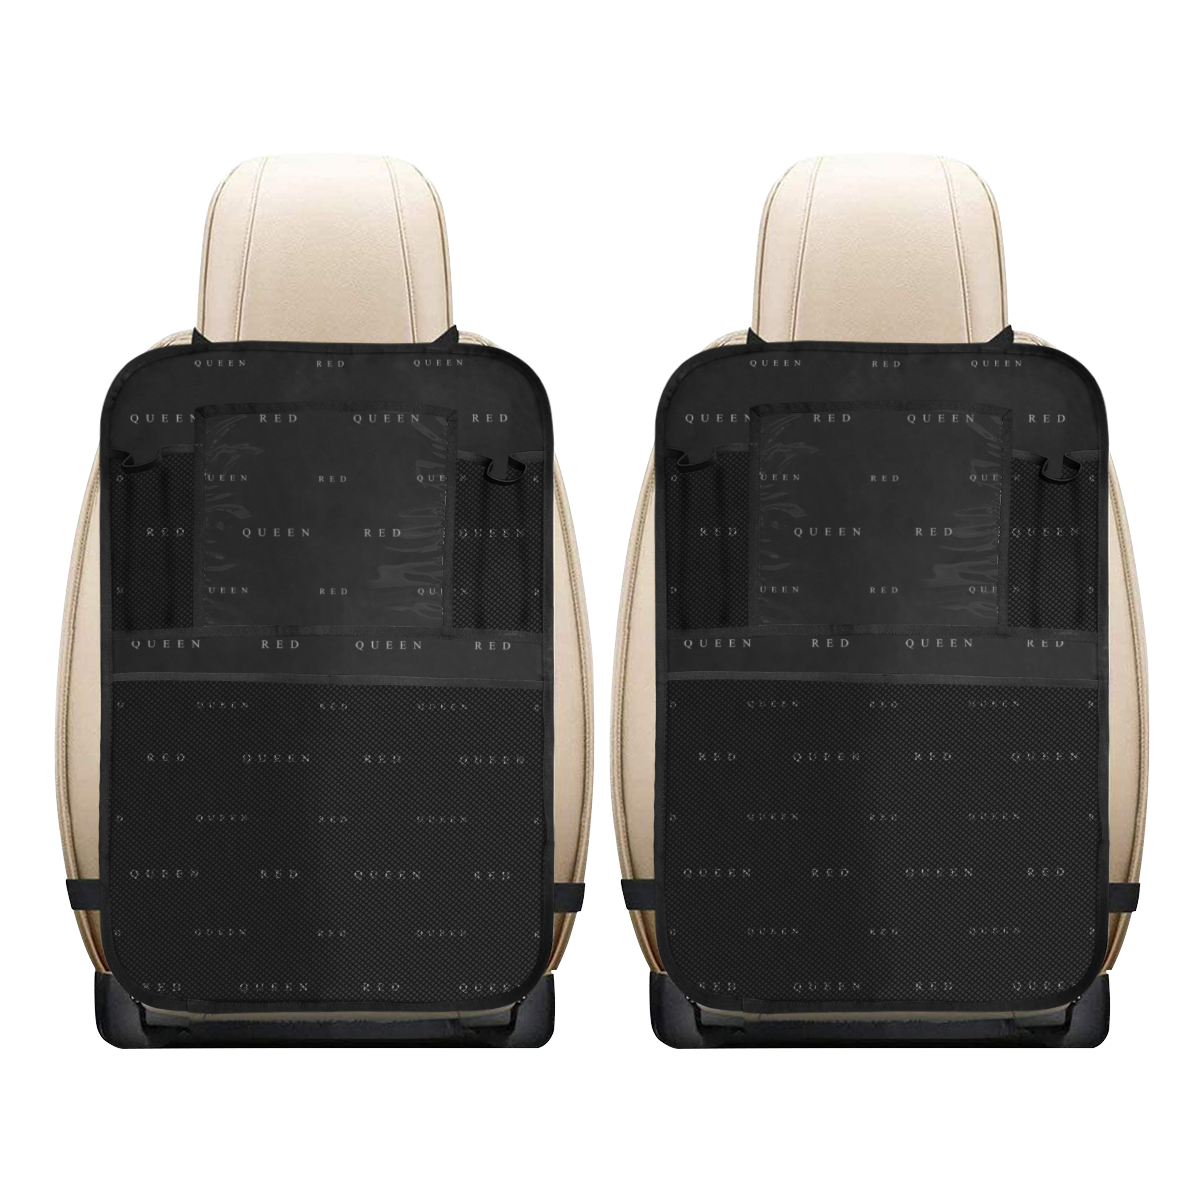 RED QUEEN GREY LOGO ALL OVER PRINT BLACK Car Seat Back Organizer (2-Pack)